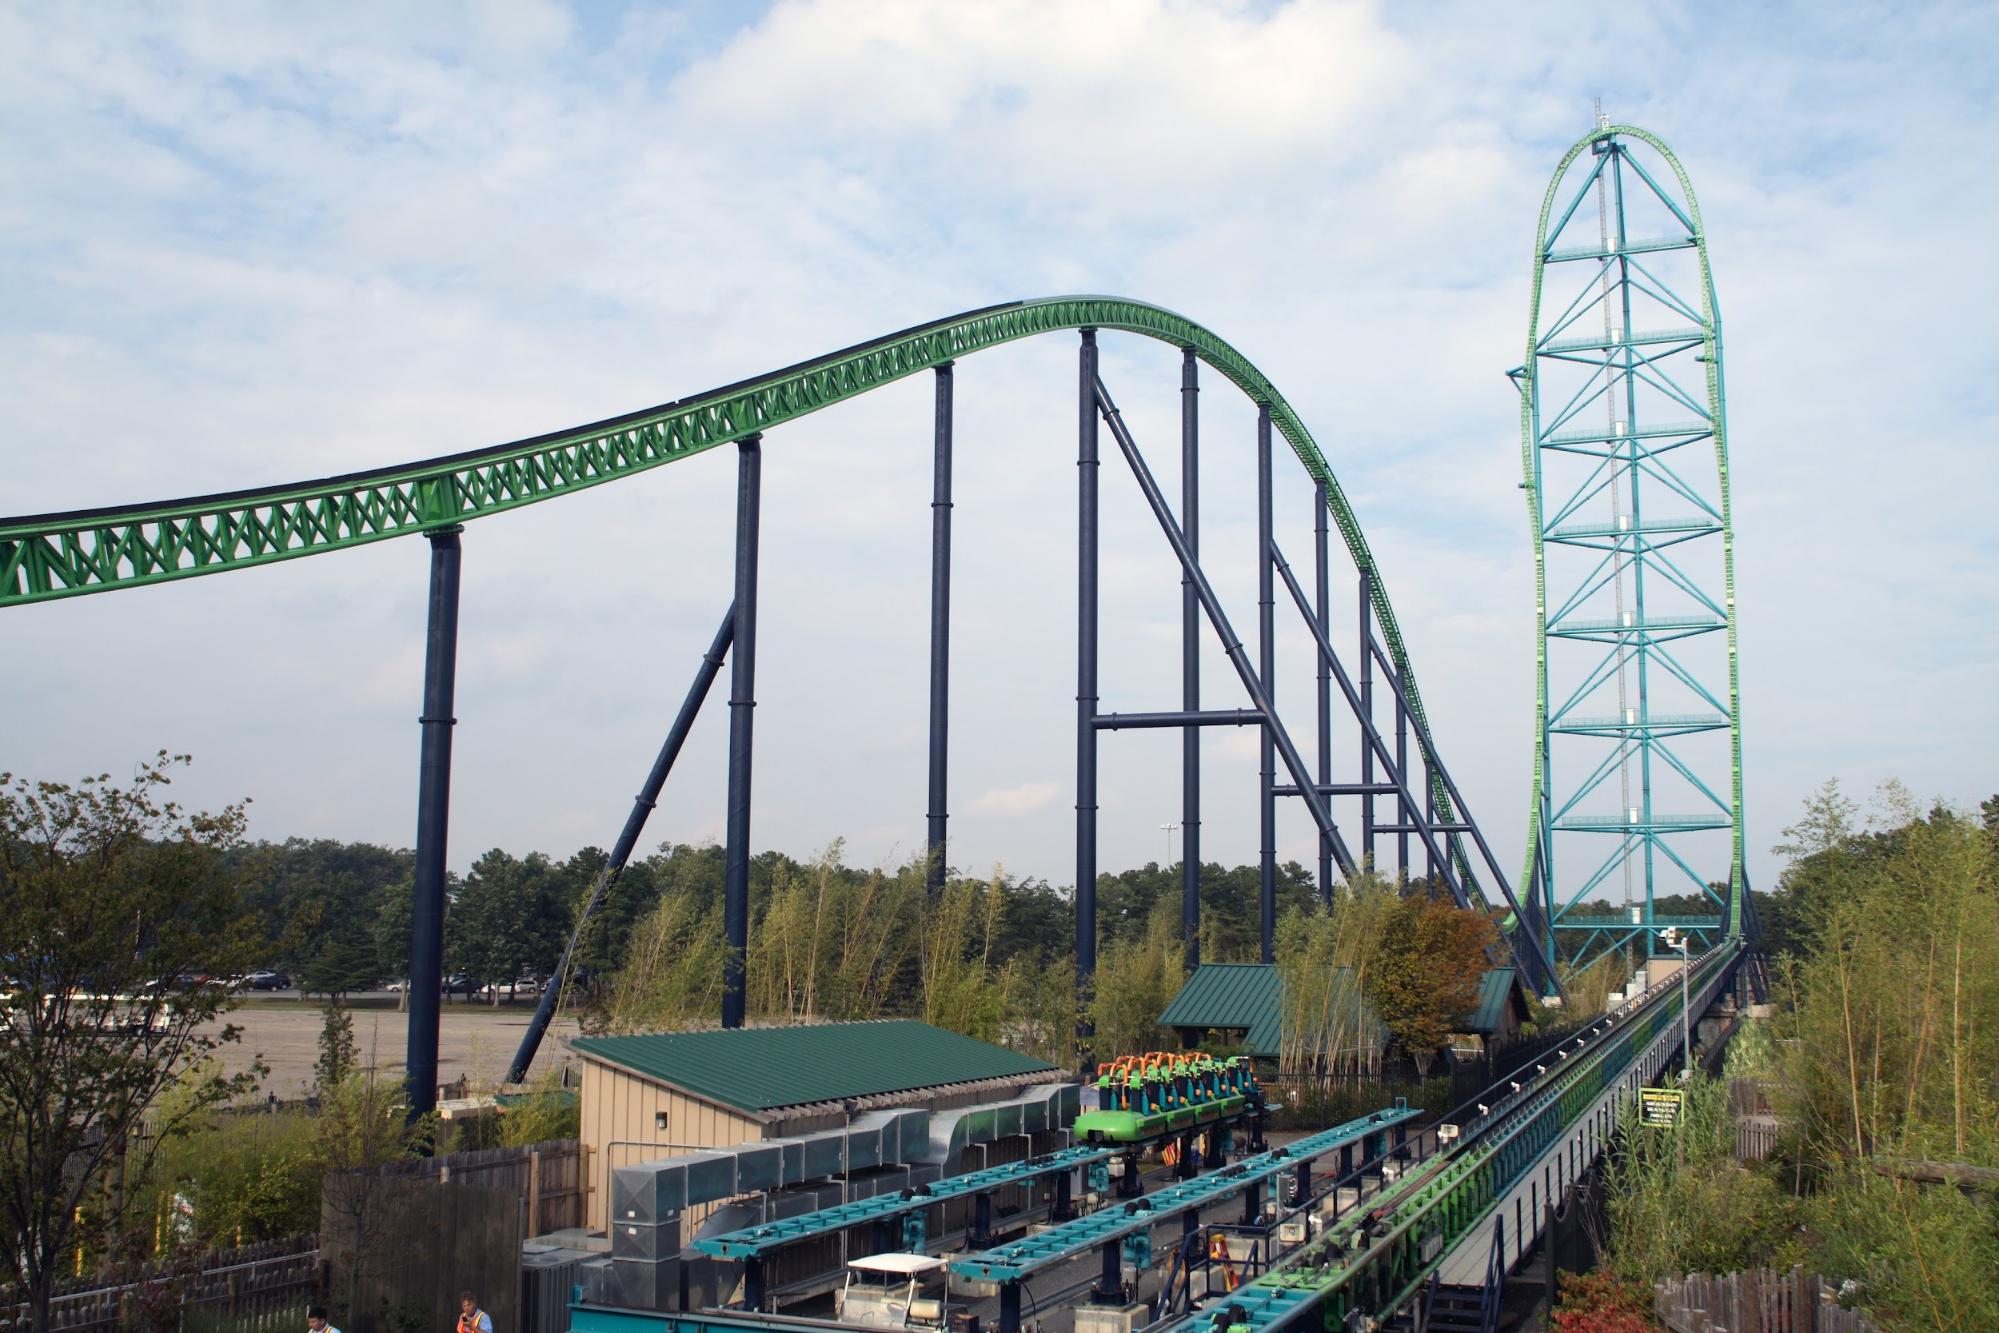 The Tallest Roller Coaster in the World is 456 Feet